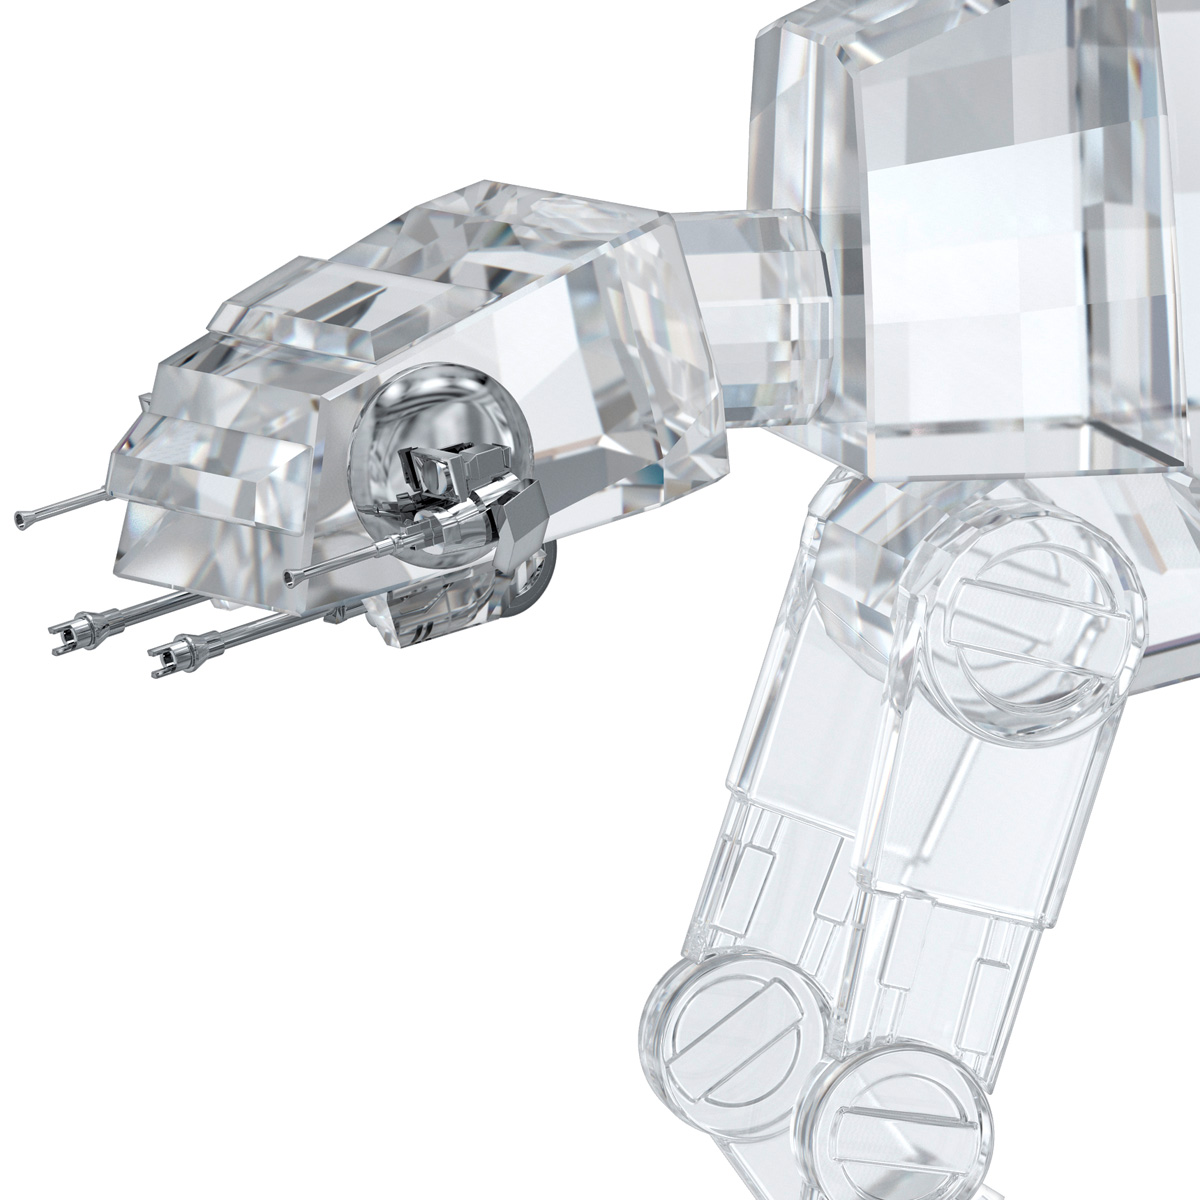 Sold at Auction: Star Wars SWAROVSKI Crystal AT-AT WALKER Figurine with Box